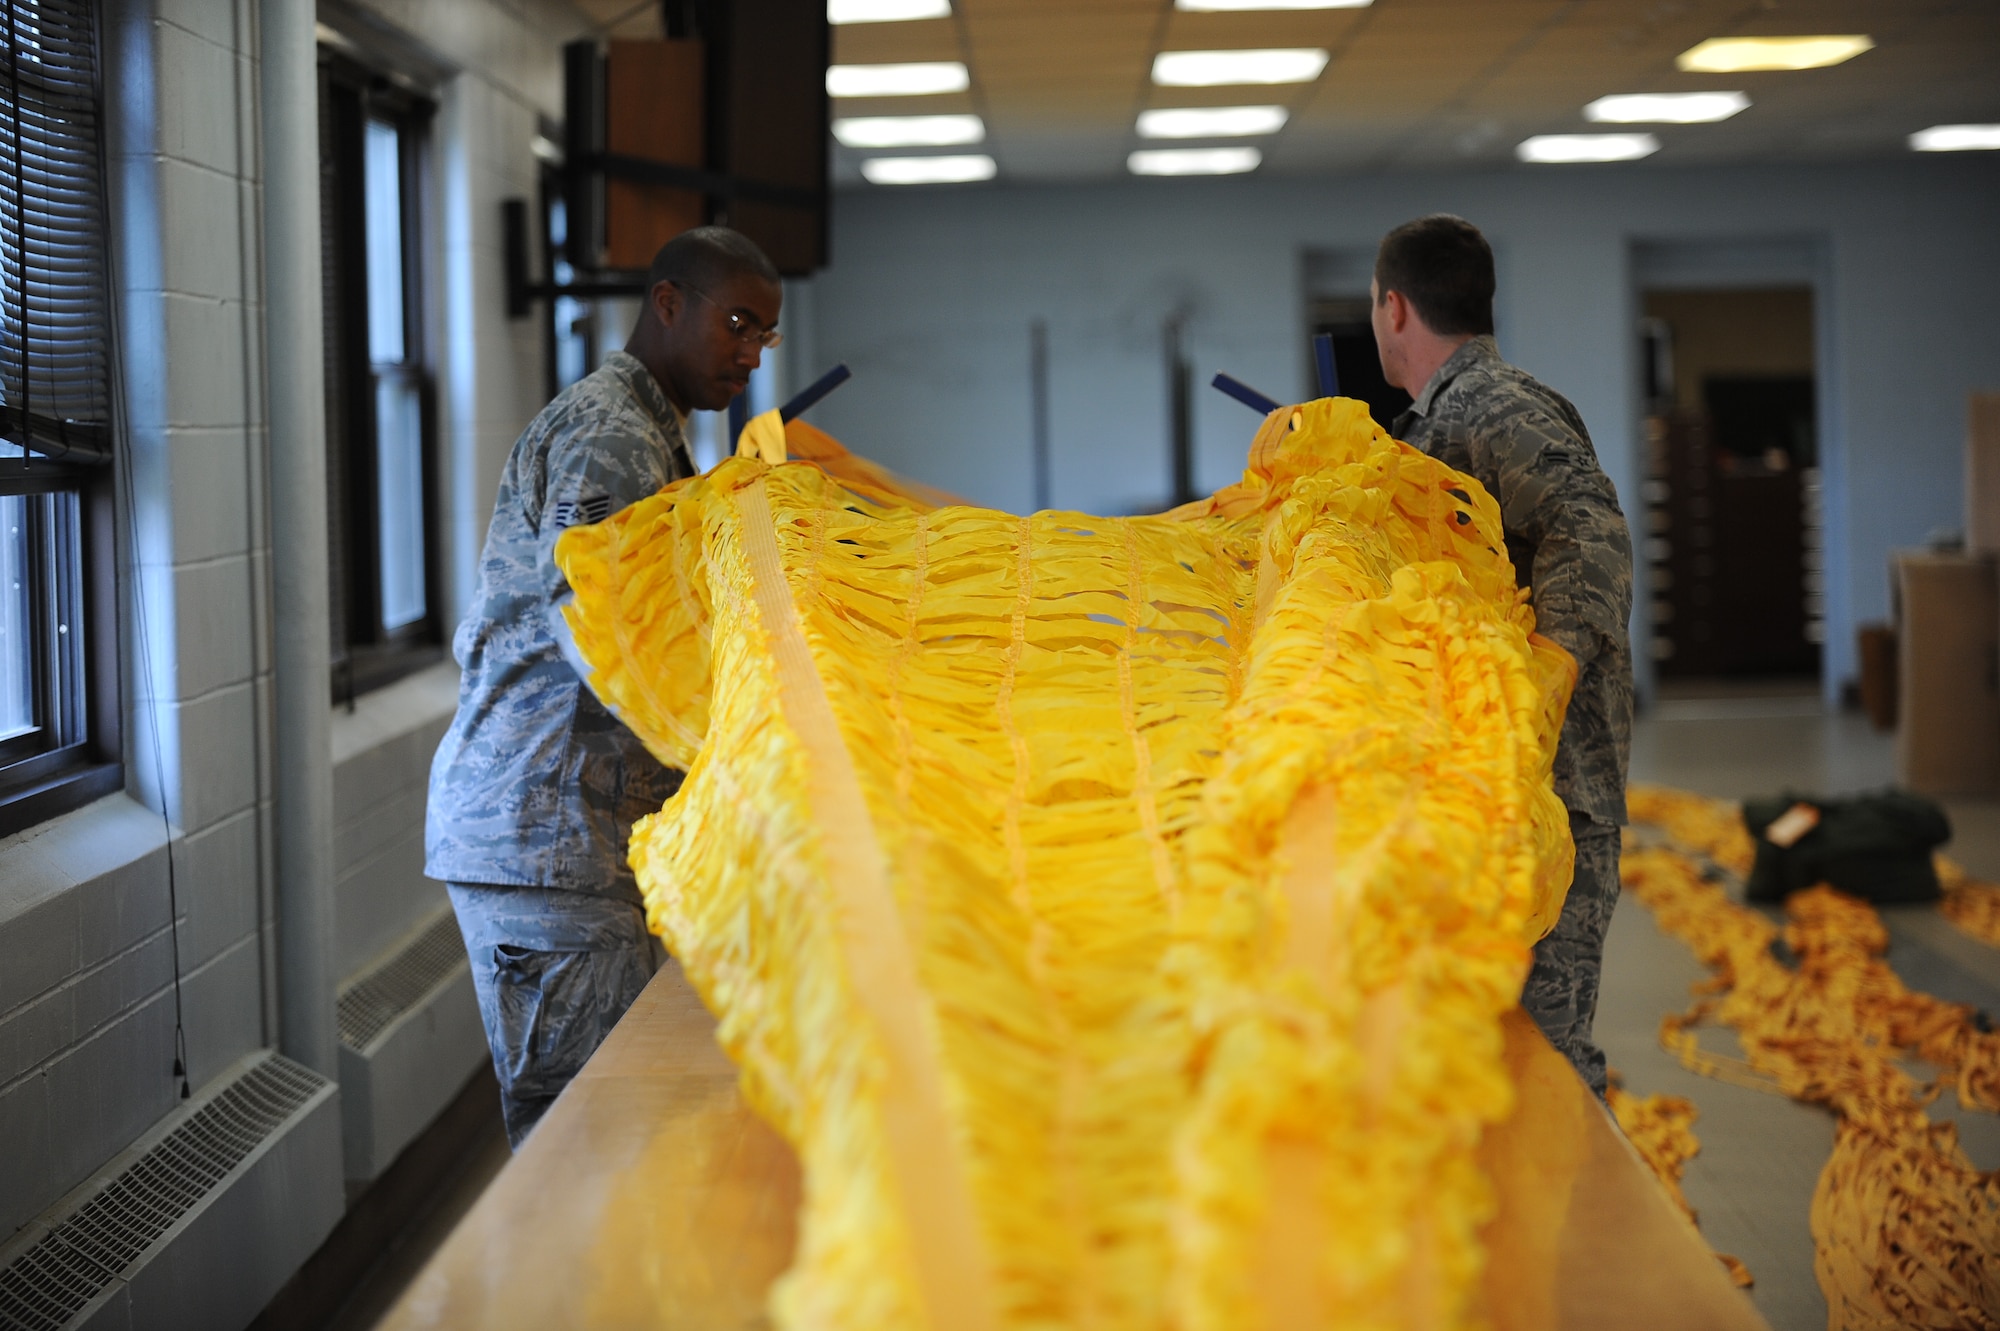 Staff Sgt. John J. Williams and Airman 1st Class Matthew Stelling, air crew flight equipment craftsman and apprentice with the 5th Operations Support Squadron at Minot Air Force Base, work on packing the drag parachute for a B-52H Stratofortress. The 90-foot parachute weighs approximately 200 pounds when fully packed and deploys as an aircraft lands, helping to slow down the aircraft on the runway. (U.S Air Force photo/Airman 1st Class Lauren Pitts)